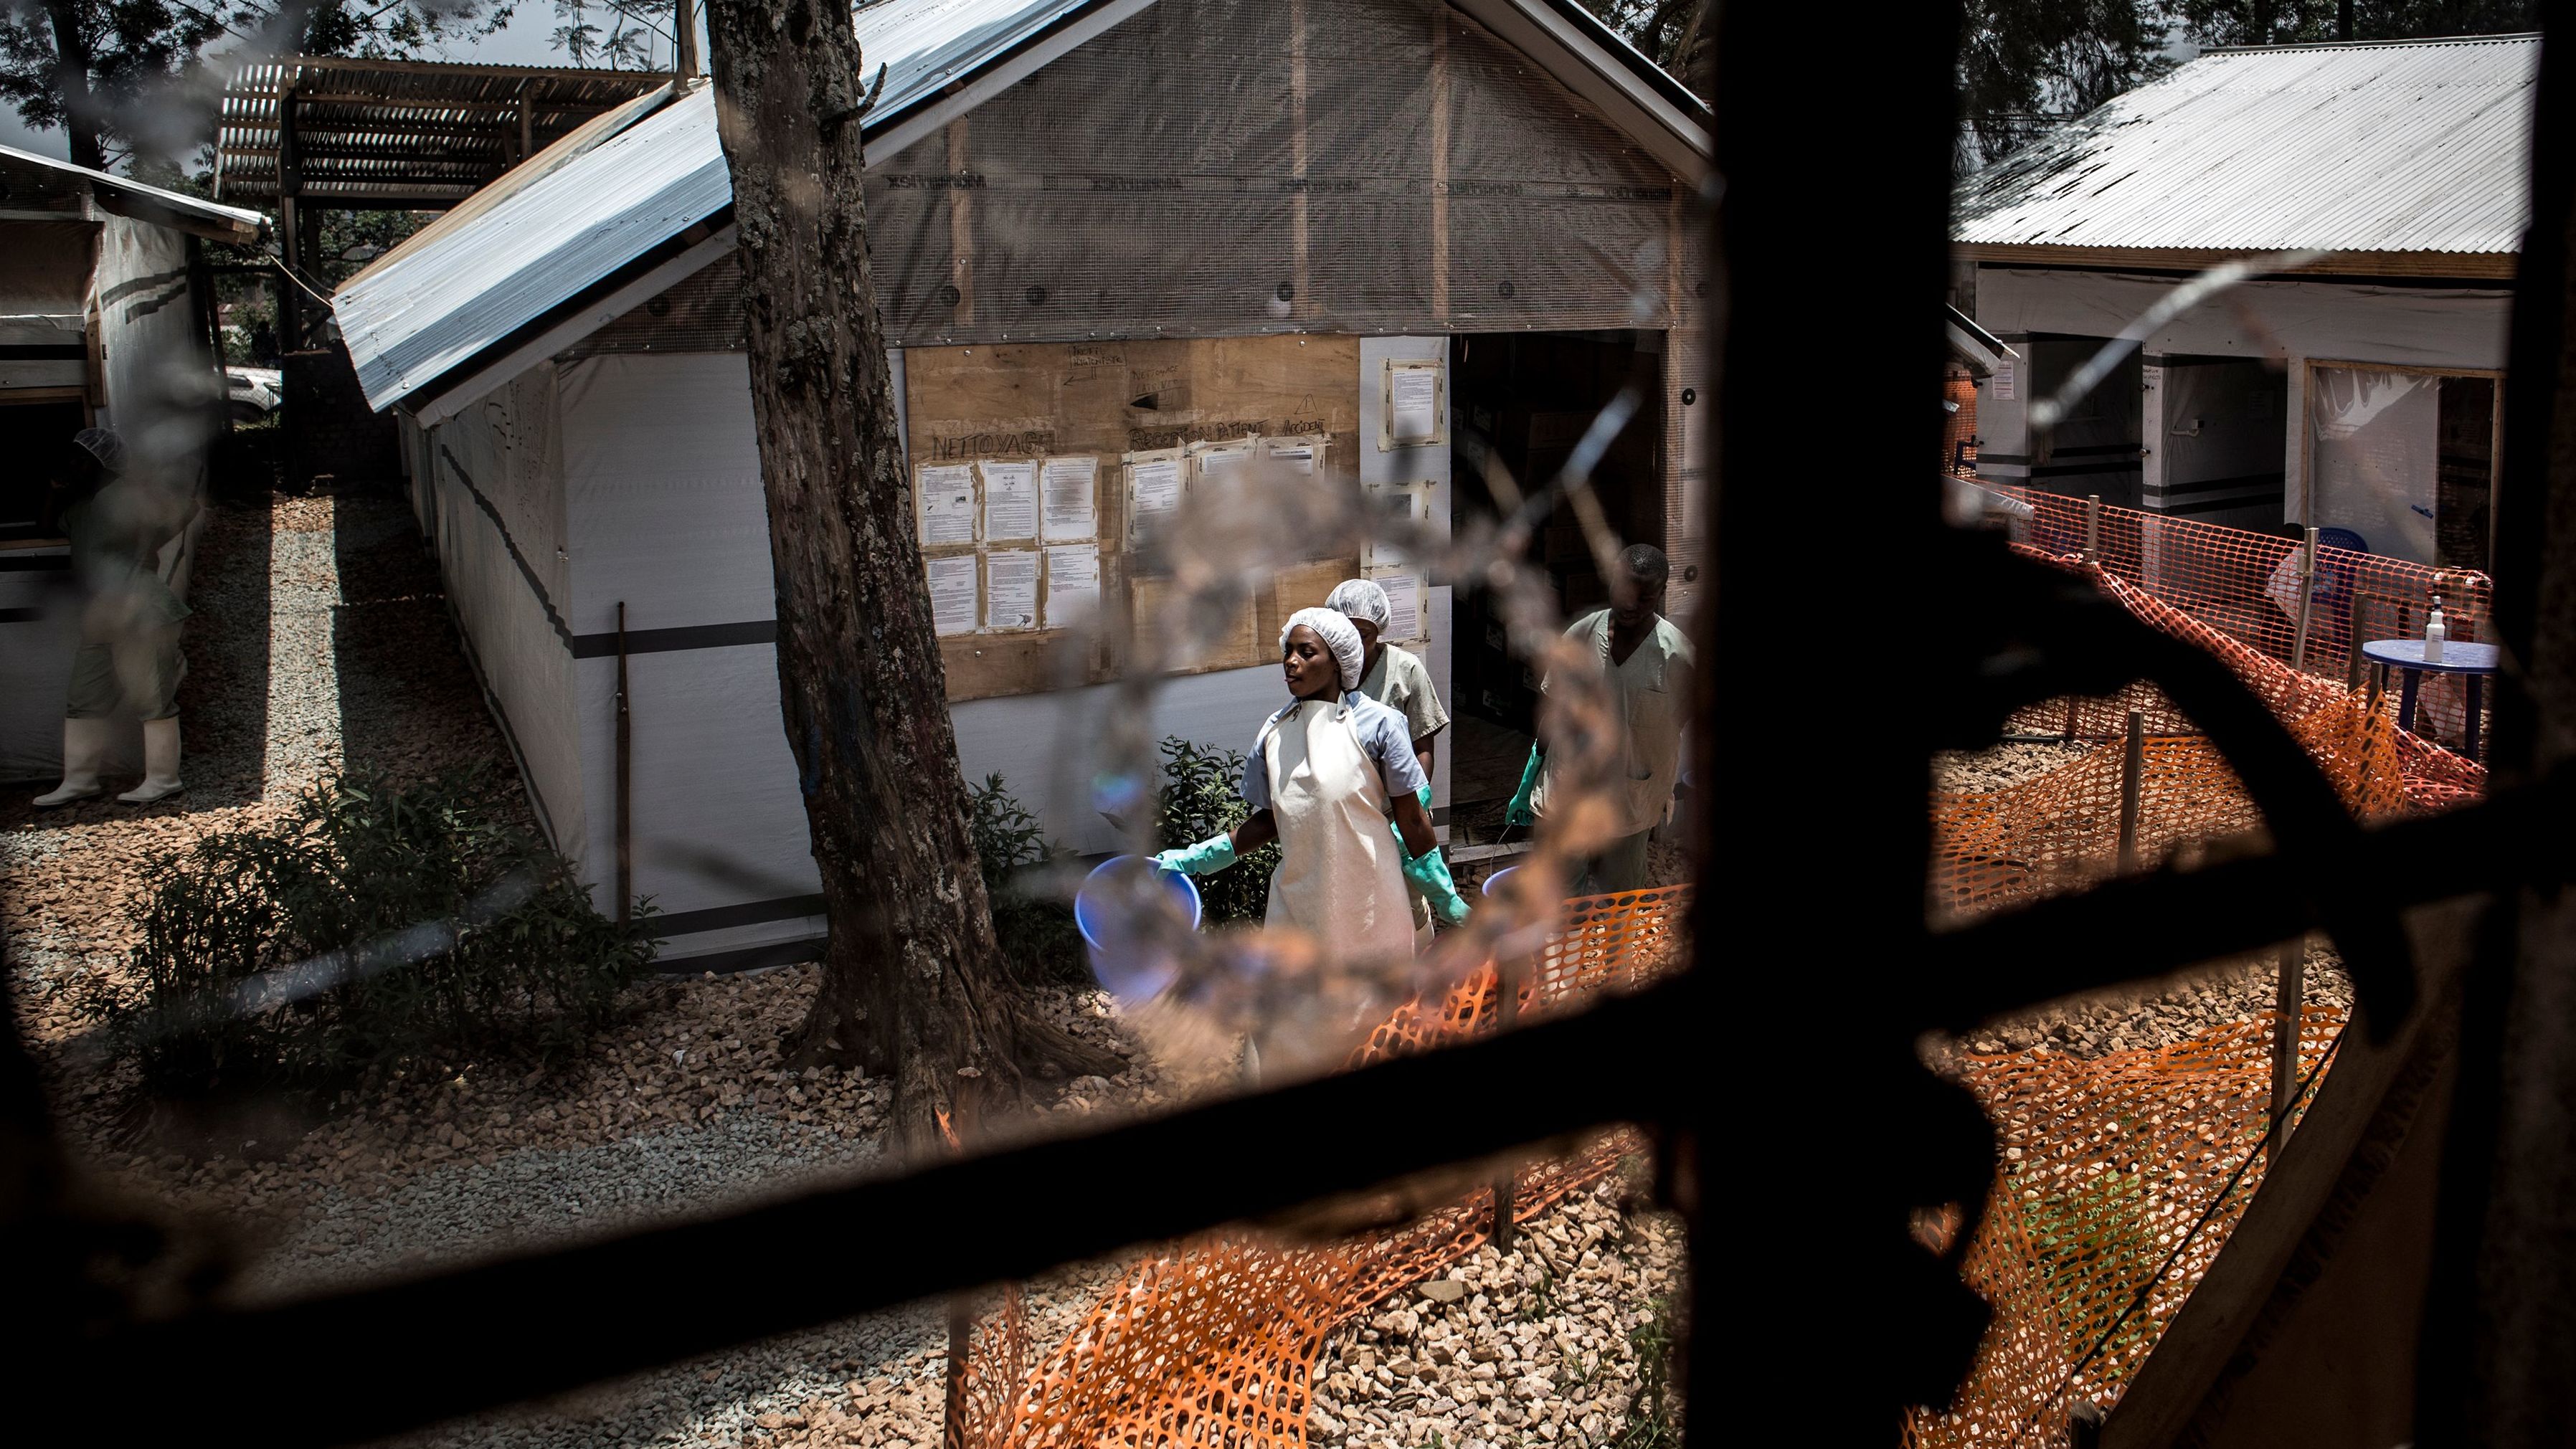 A bullet hole is shown in a window at the Butembo treatment center after the attack in the Democratic Republic of Congo.